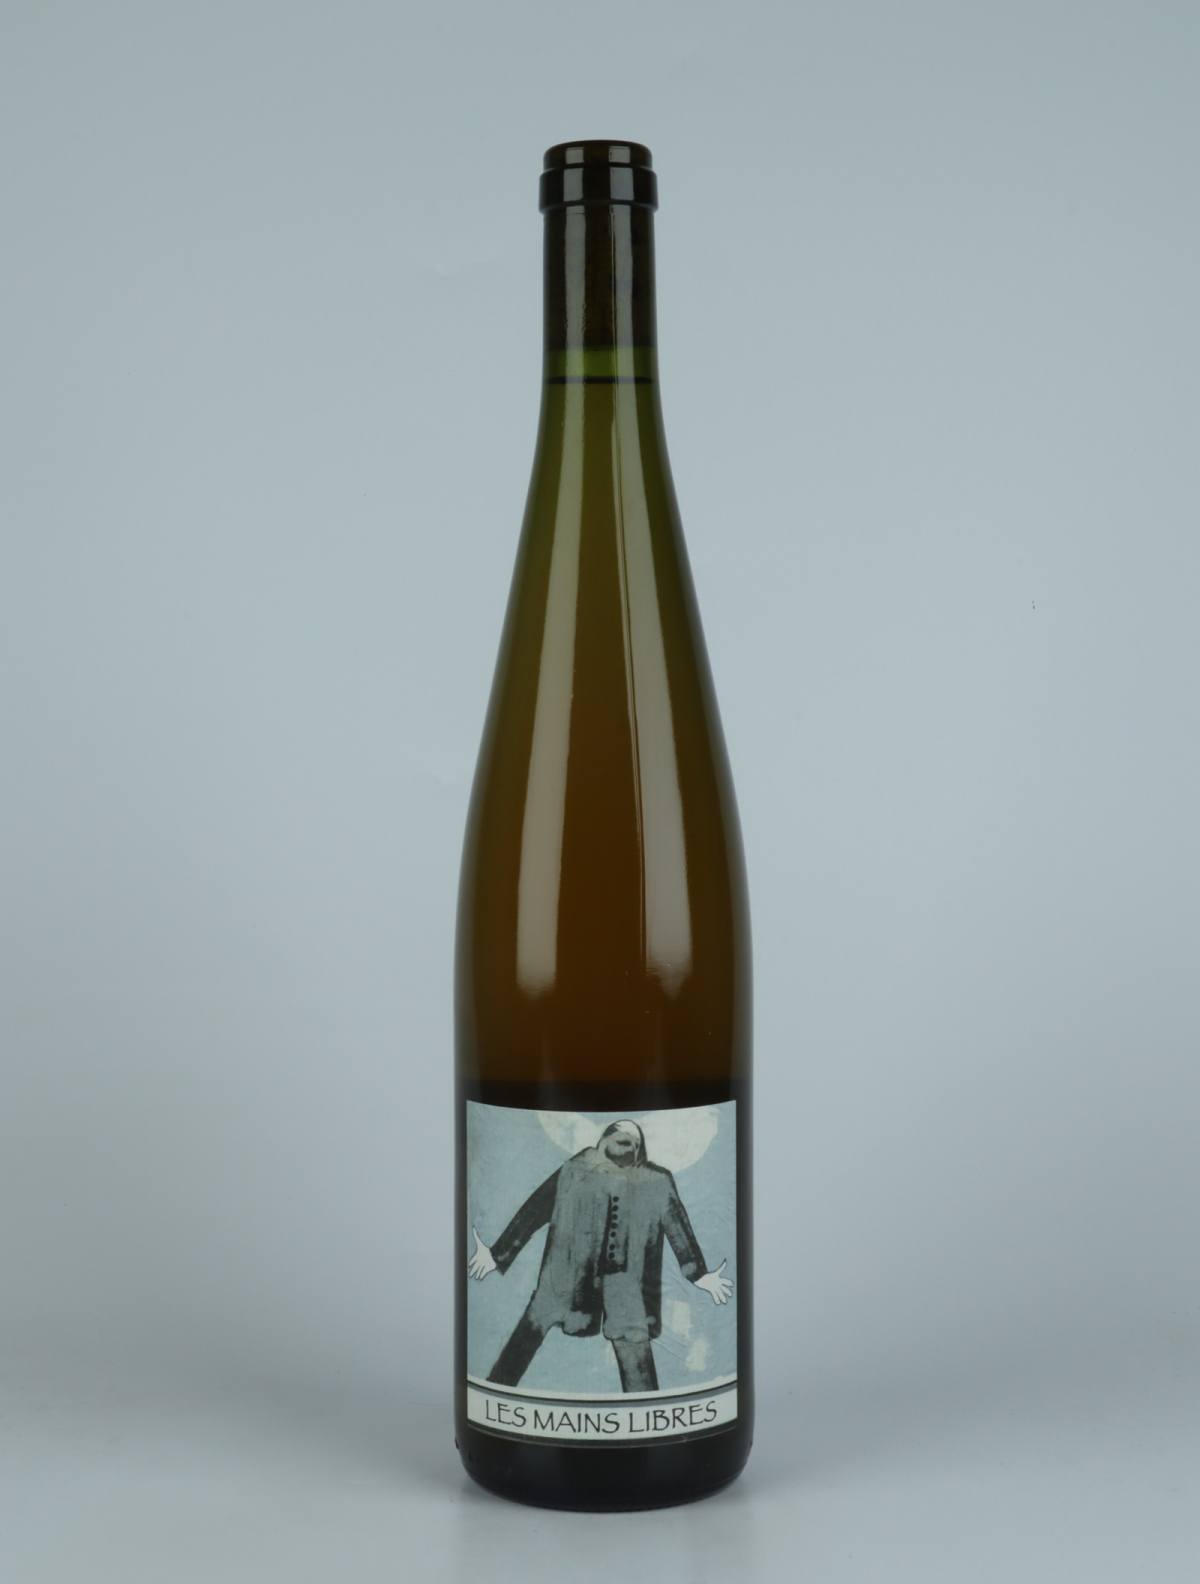 A bottle 2022 Les Mains Libres Orange wine from Domaine Rietsch, Alsace in France